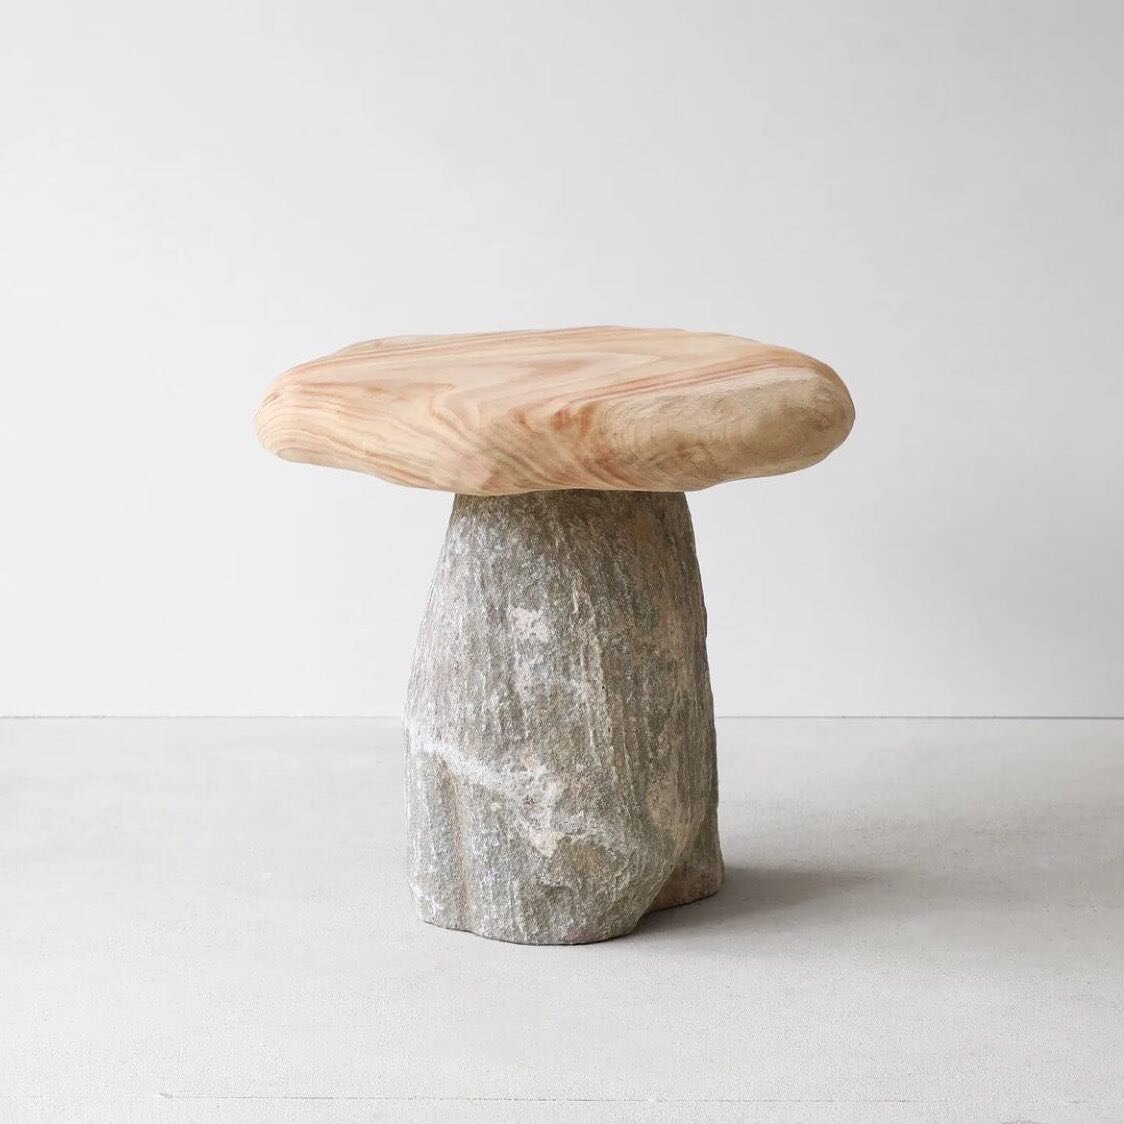 Bolete Side Table in natural wood finish by @batten_and_kamp 
#collectibles #sculpturalfurniture 
Collaboration with @henry__dath